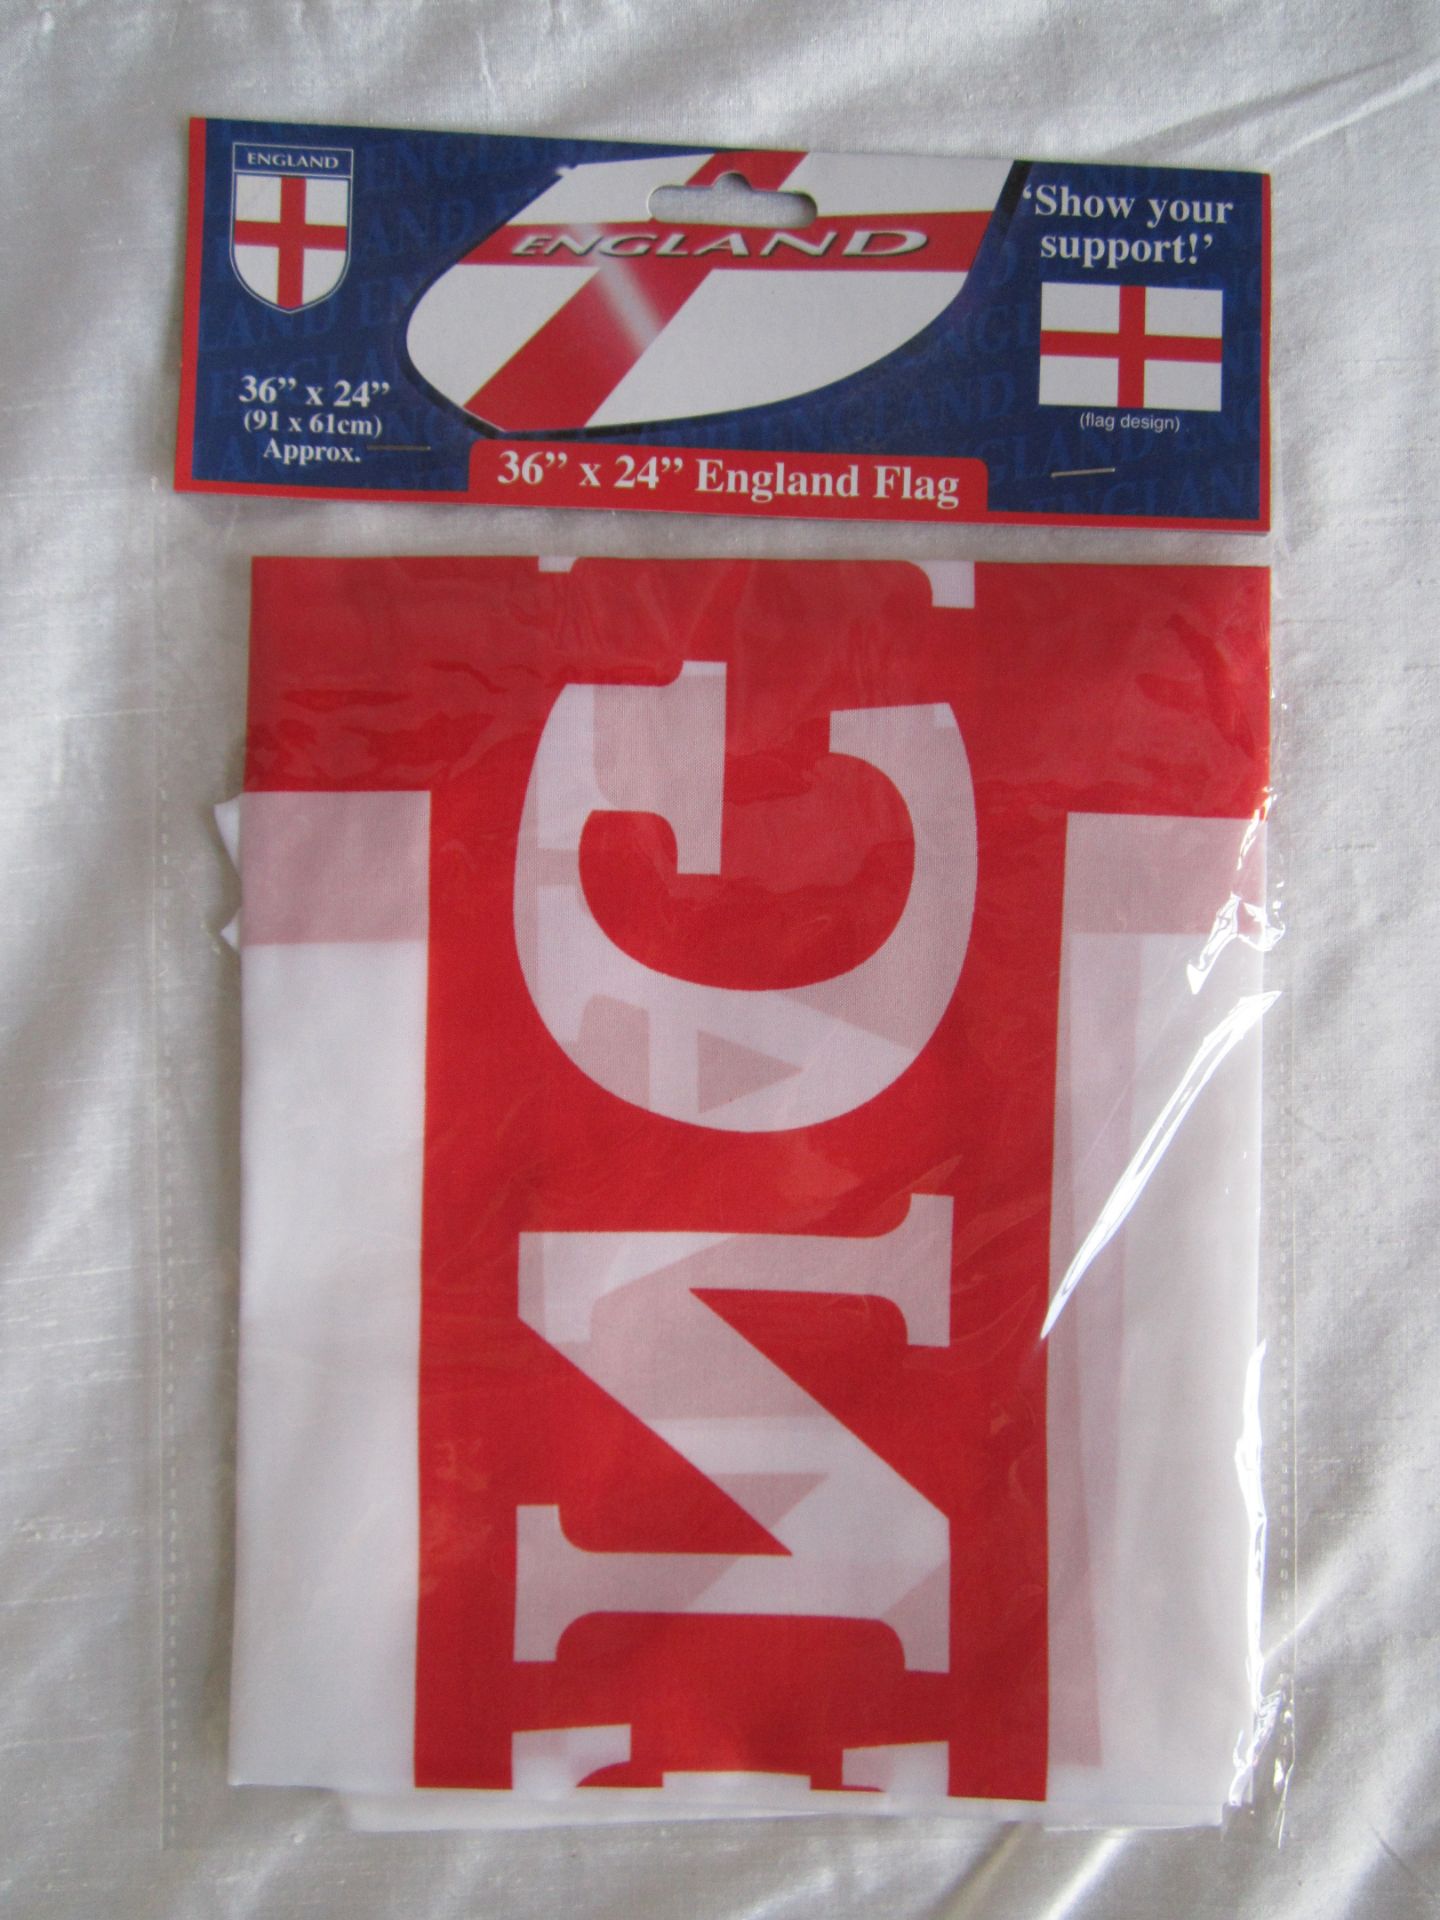 50 Pc Joblot Of England Merchandise, Flags And Hats See Description/Delivery Available - Image 2 of 3